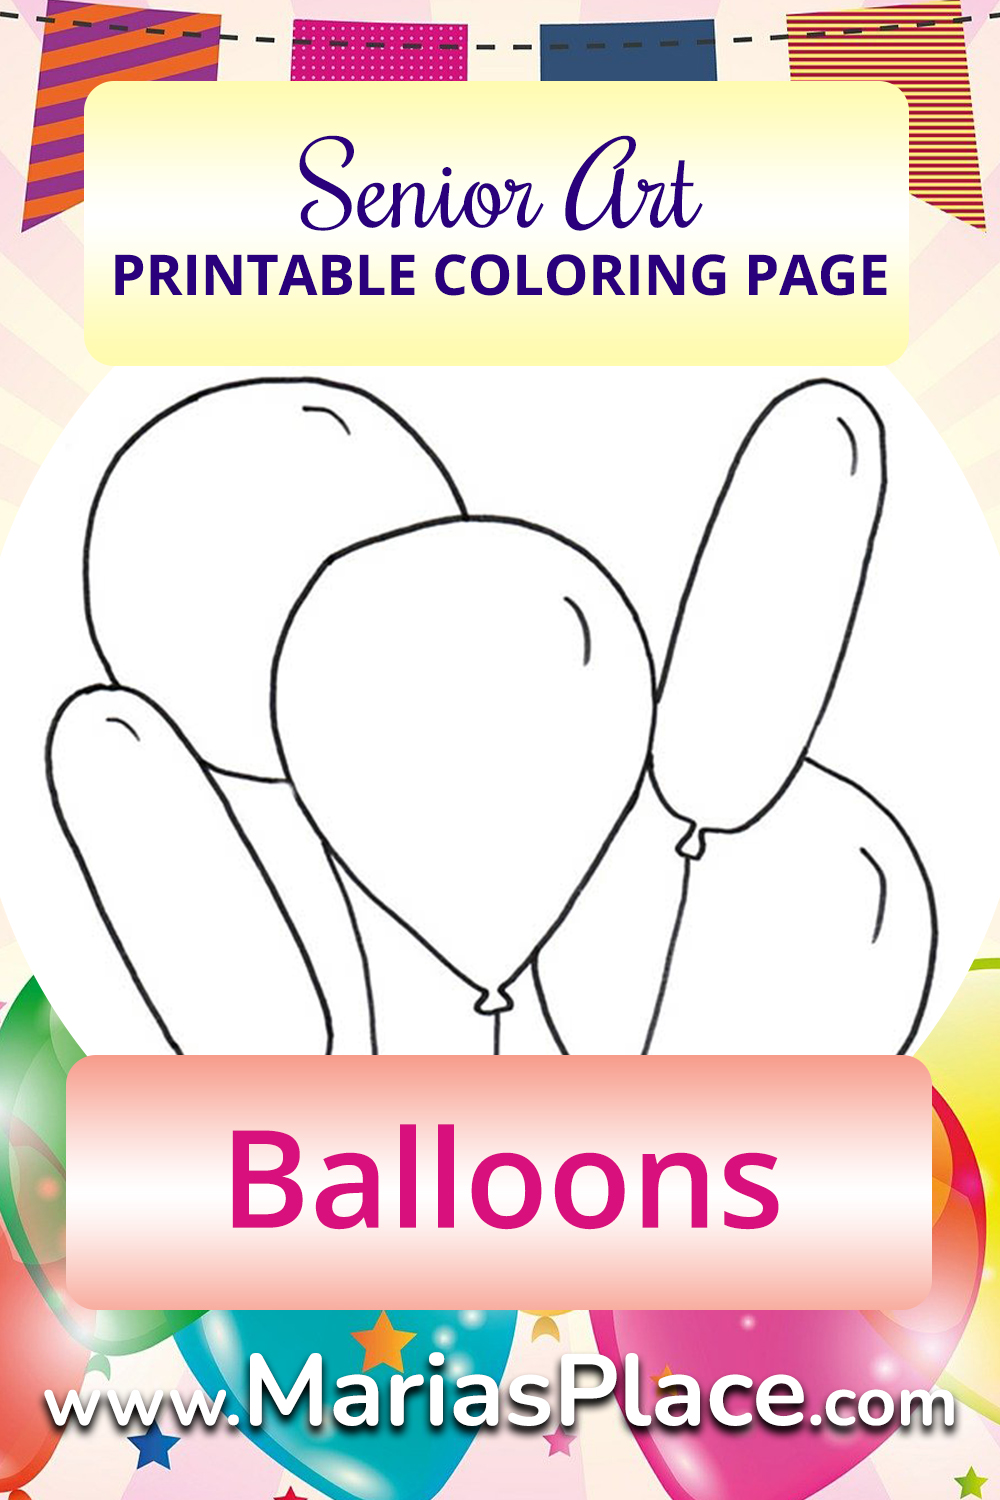 Coloring – Balloons